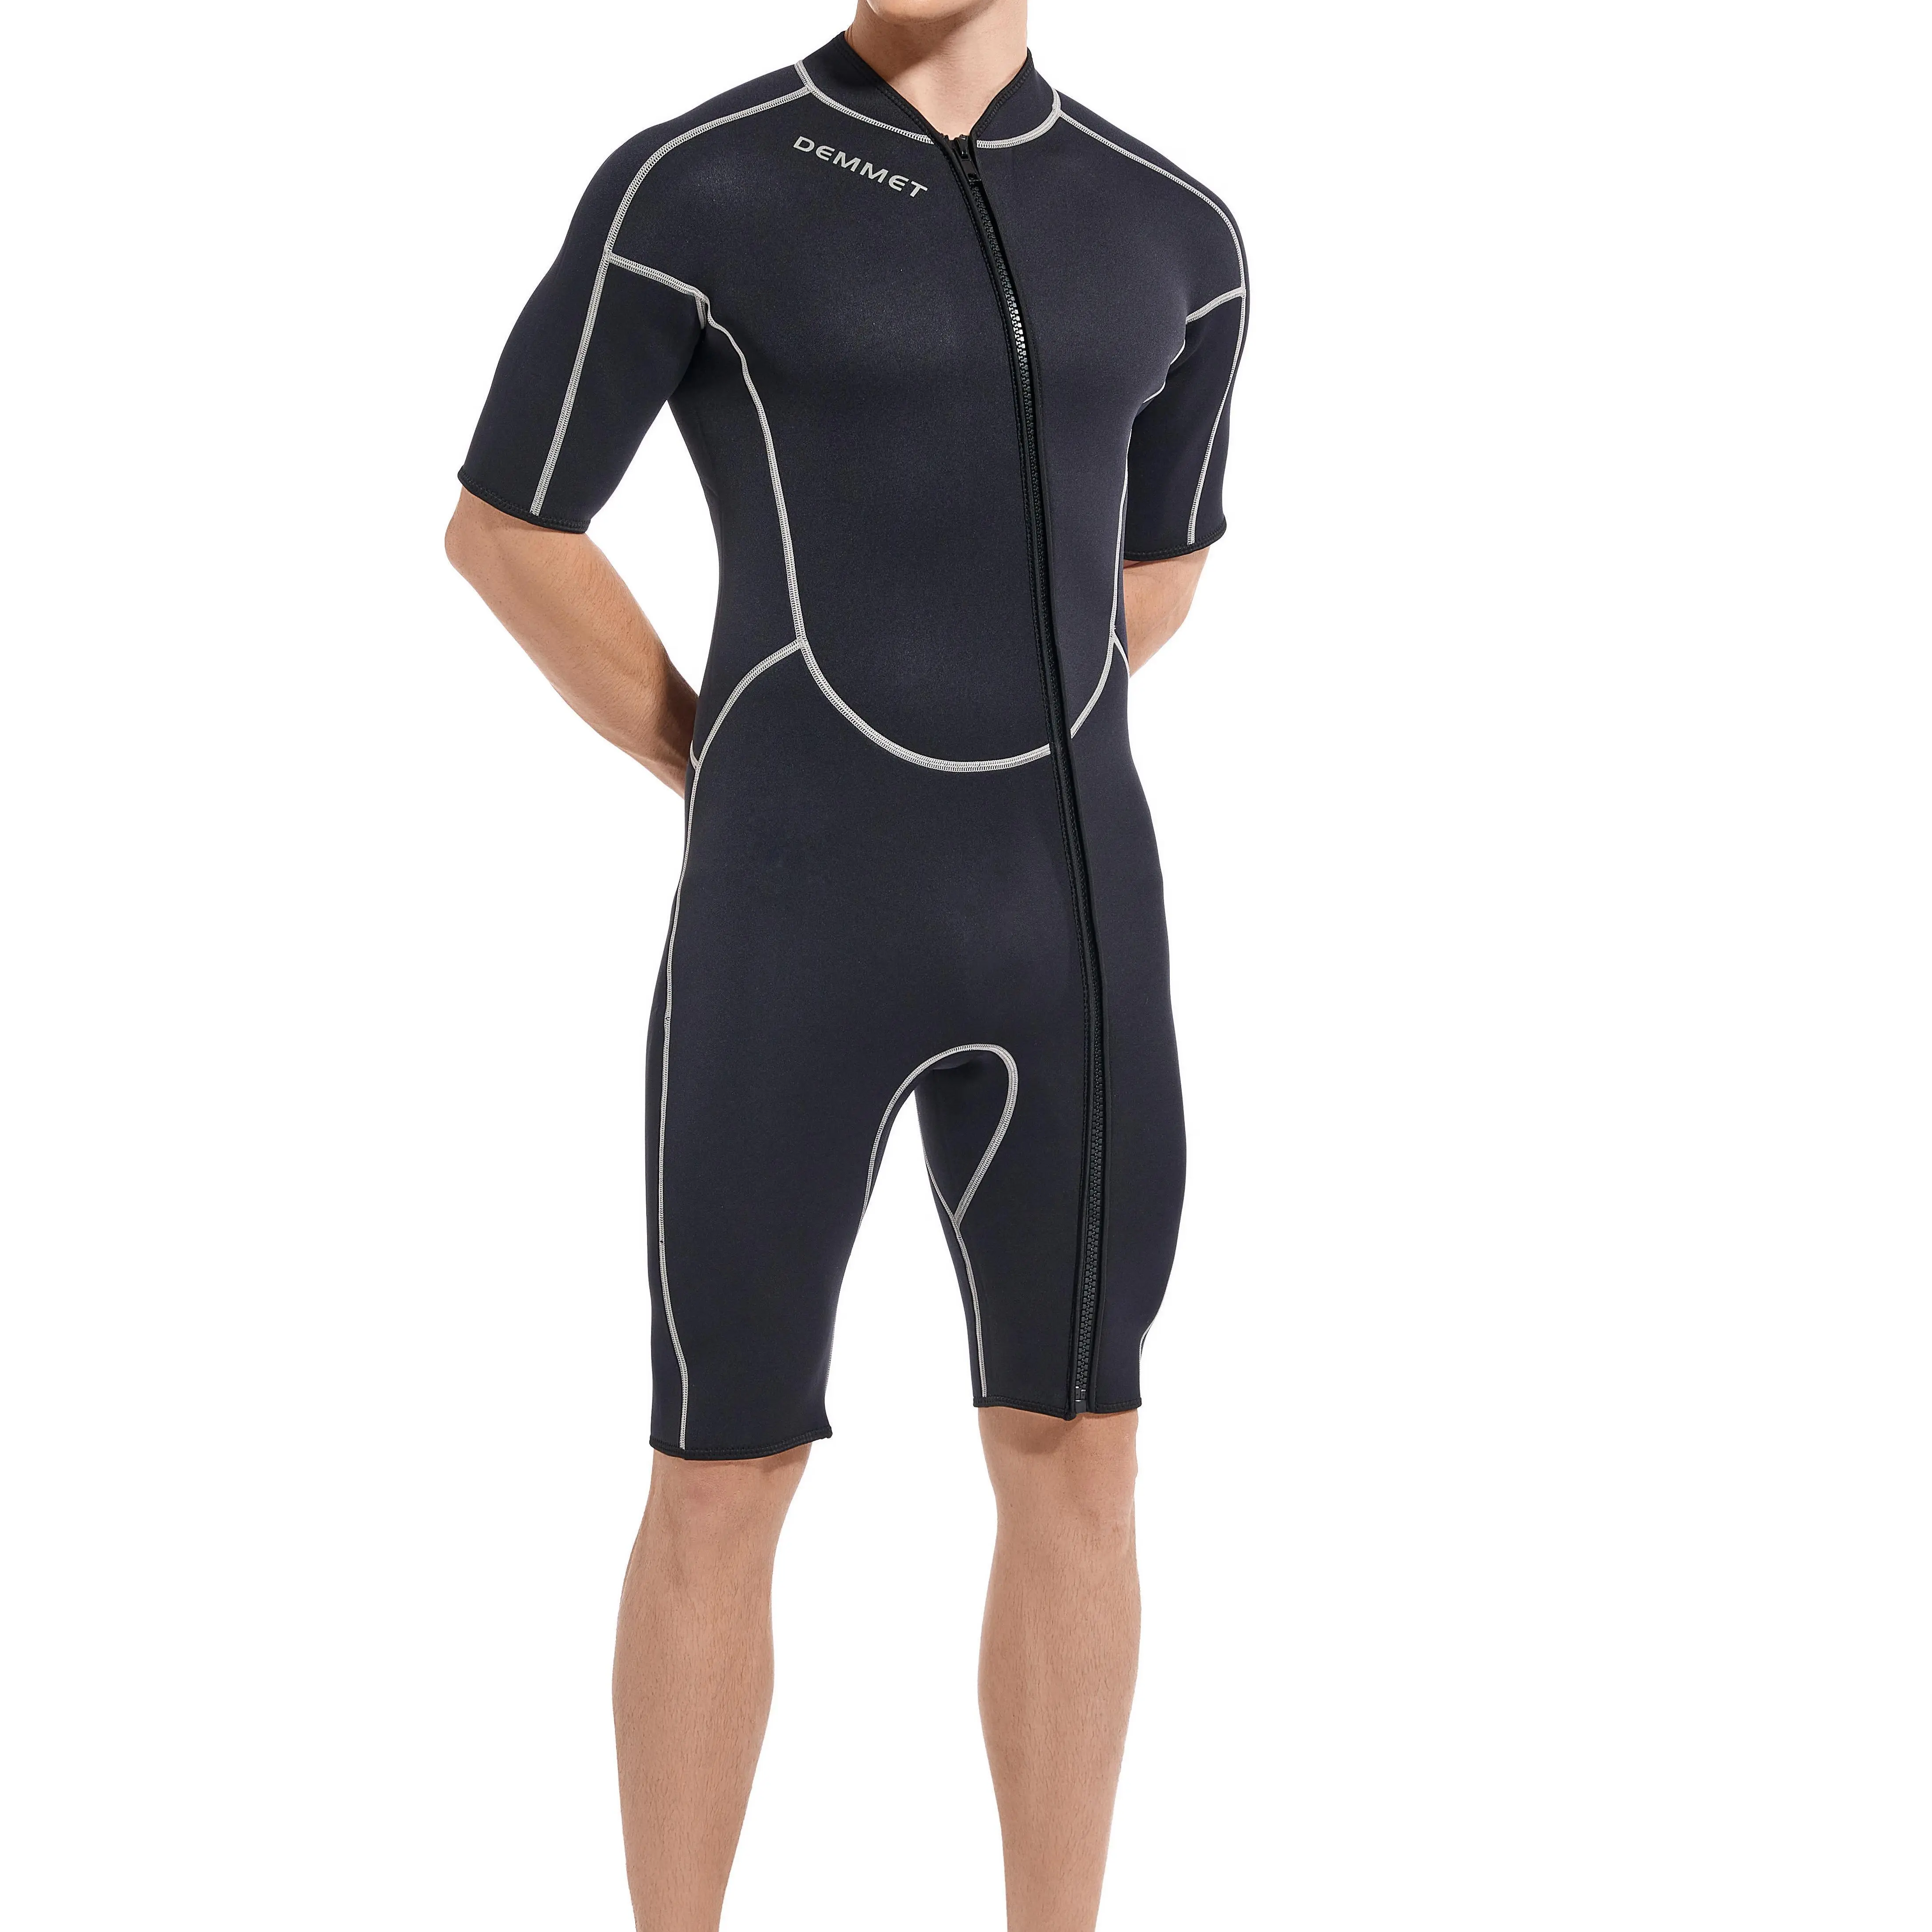 Mens 3mm Shorty Long Sleeve Wetsuit Womens Full Body Diving Suit Front Zip Diver for Diving Snorkeling Surfing Swimming